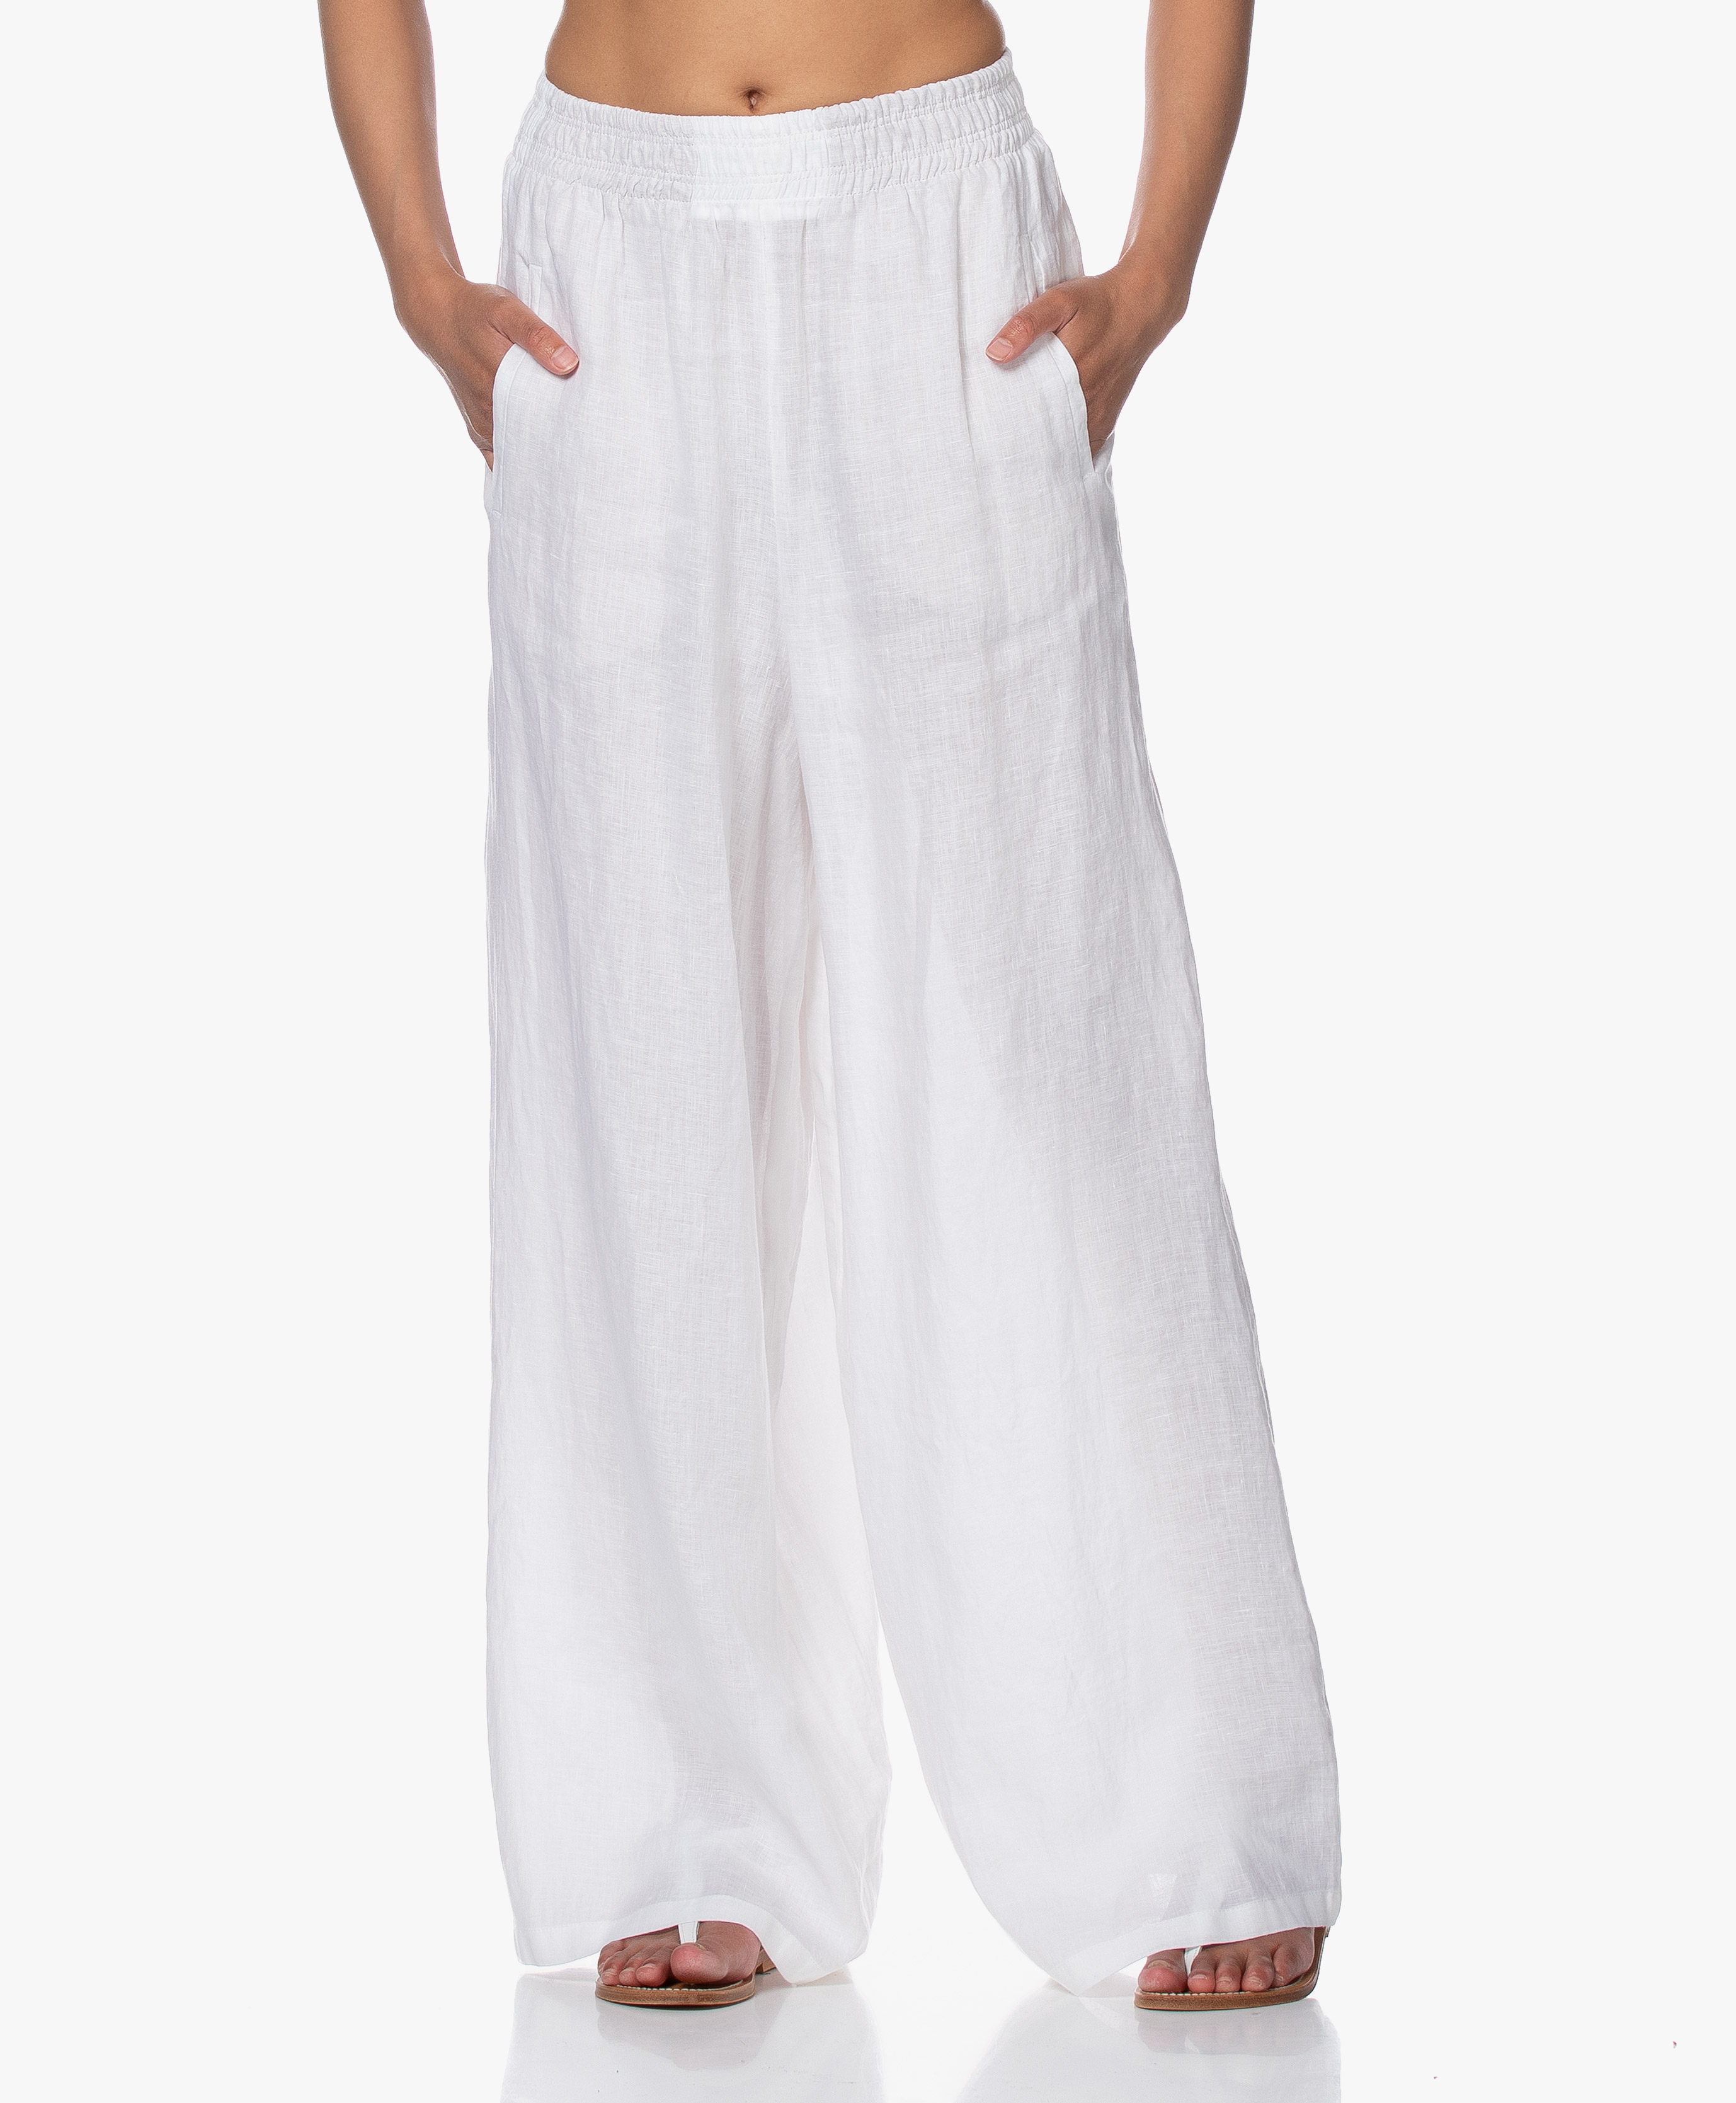 Drykorn Windy Loose Fit Linen Pants White Windy 126032 6000